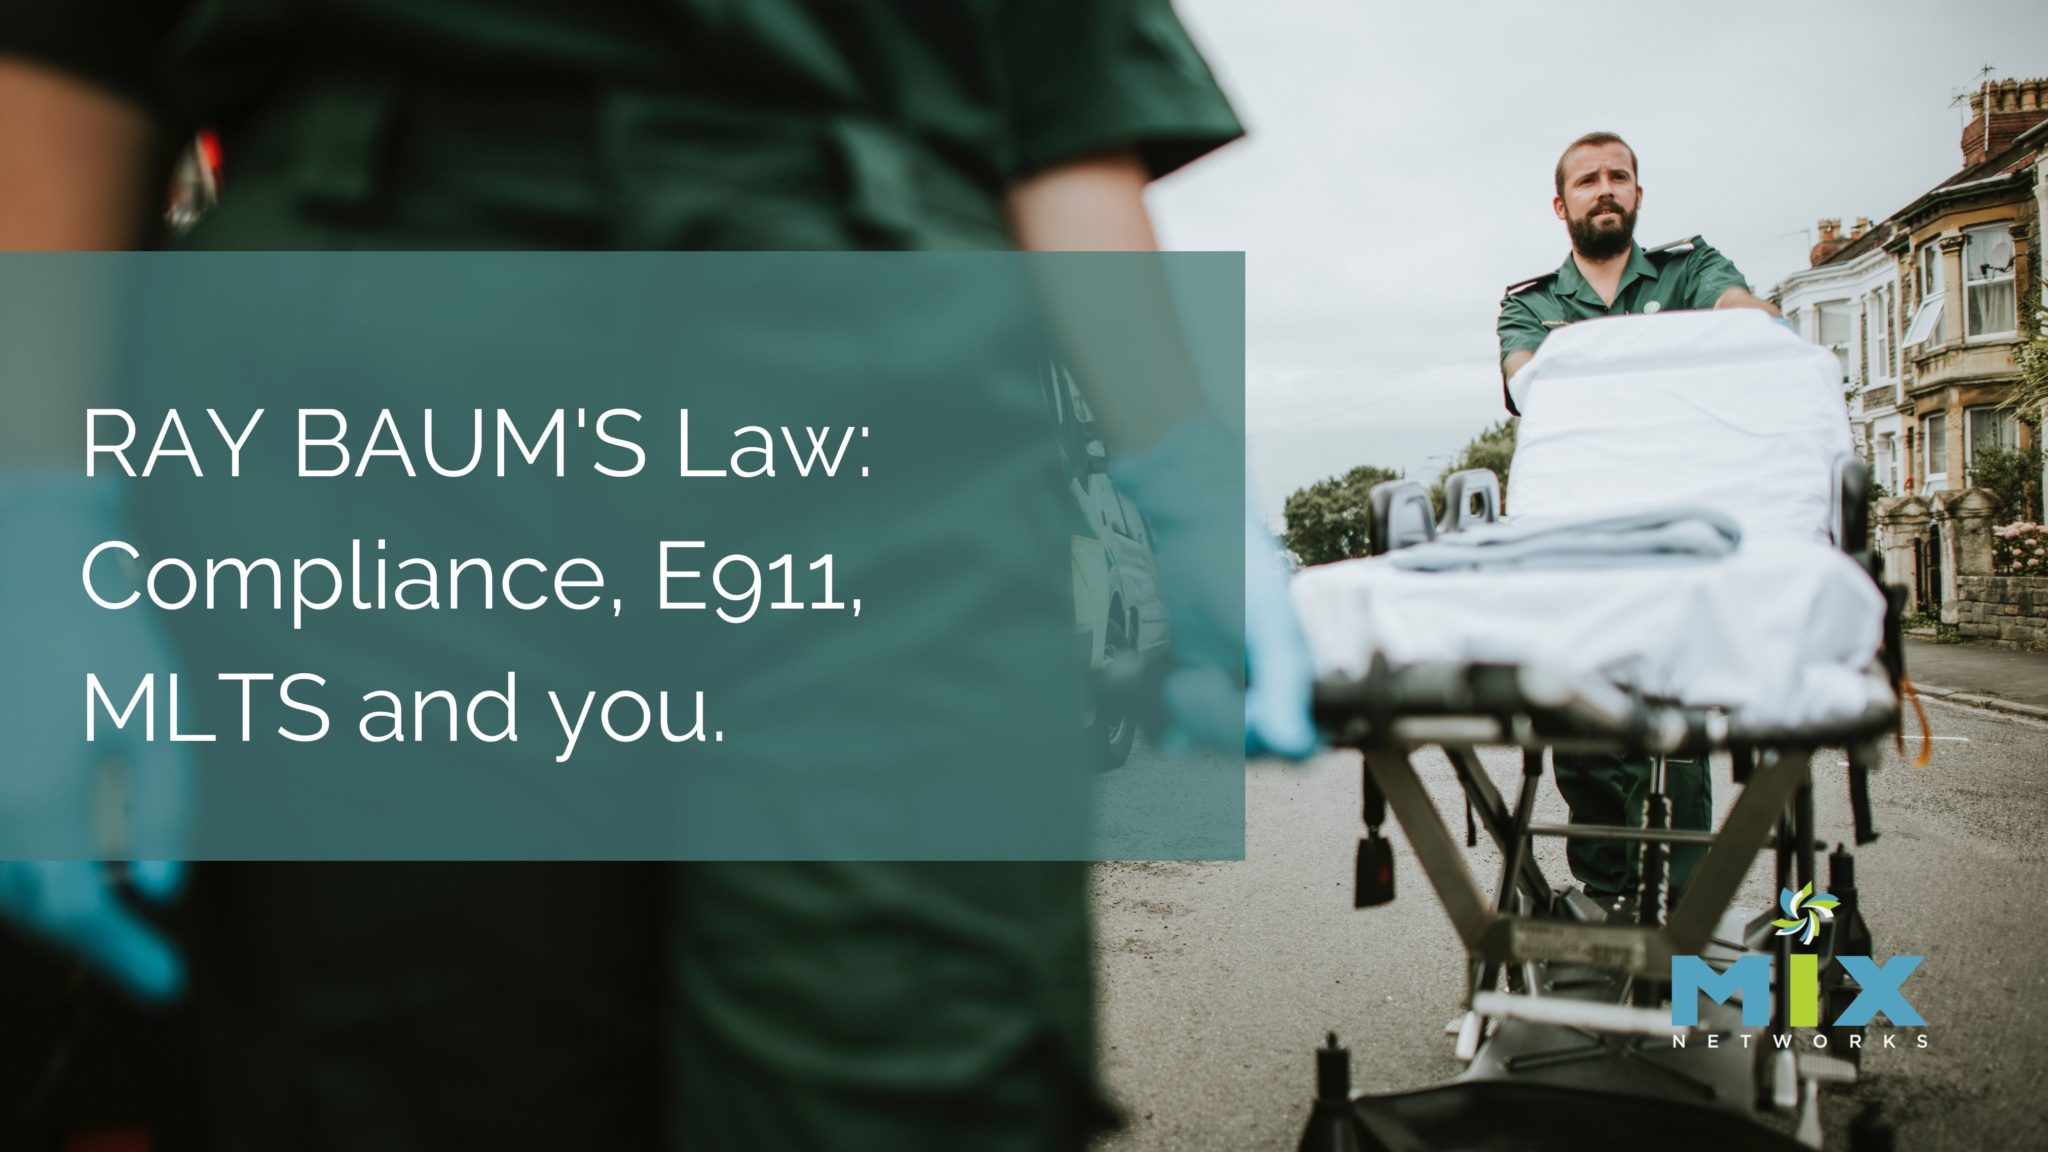 RAY BAUM’S Law: Compliance, E911, MLTS and You